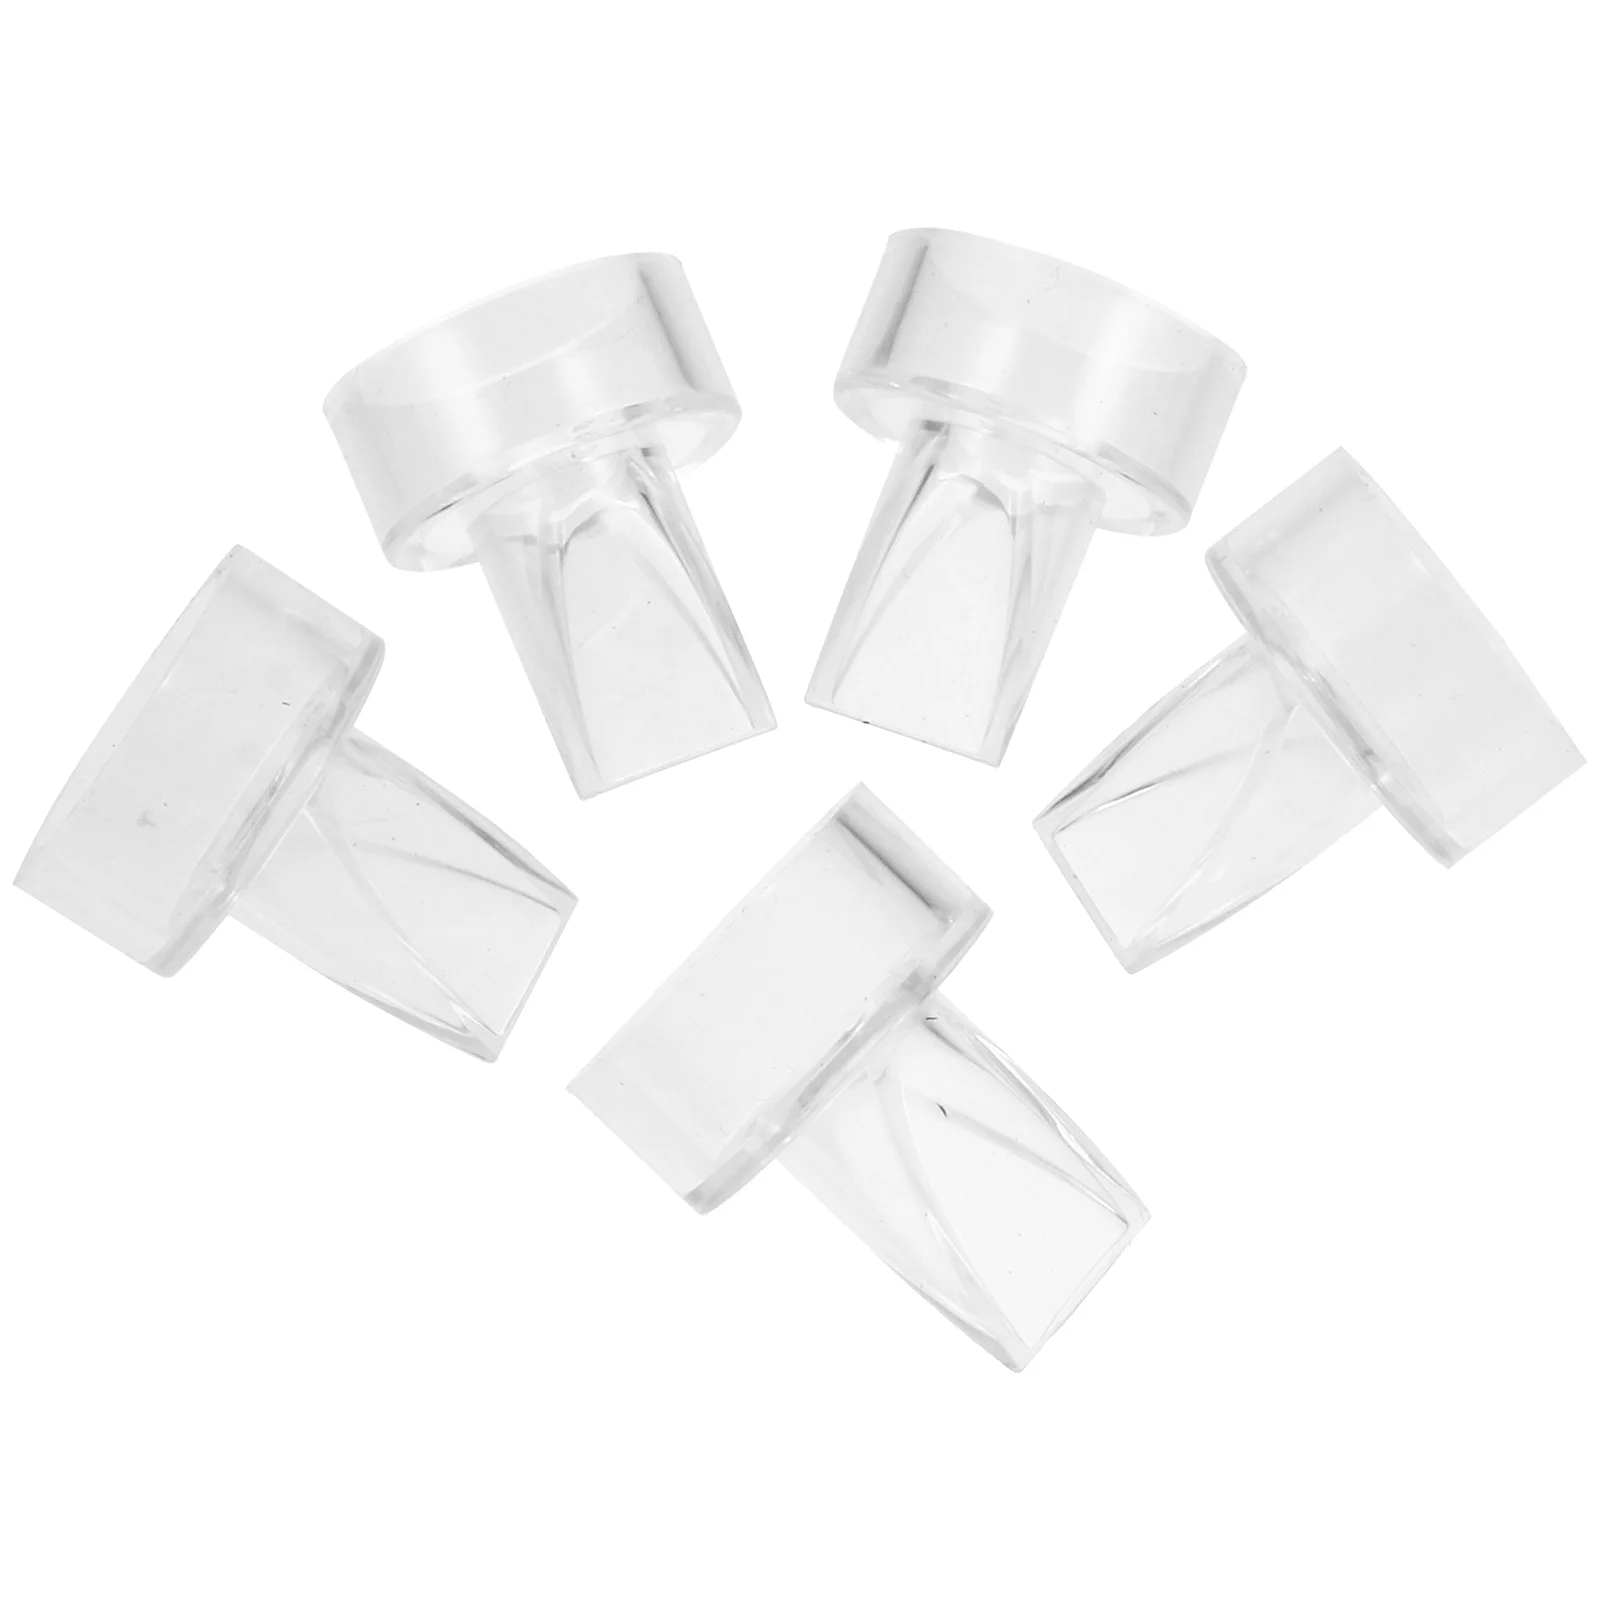 

5pcs Electric Breast Pump Parts Accessories Silicone Duckbill Valves (22mm)